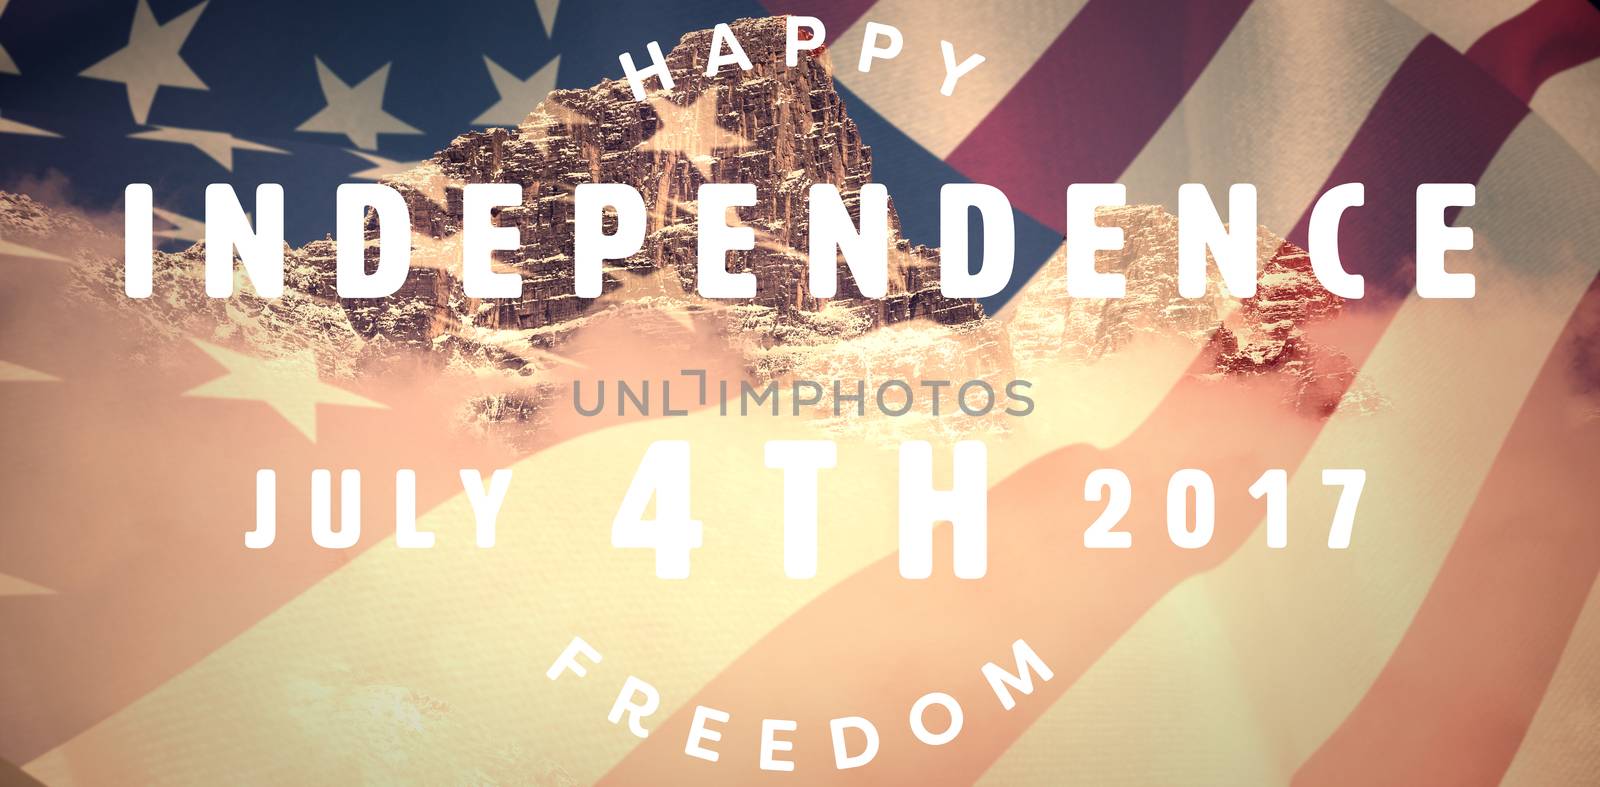 Computer graphic image of happy 4th of july text against view of snowy mountain range and clouds